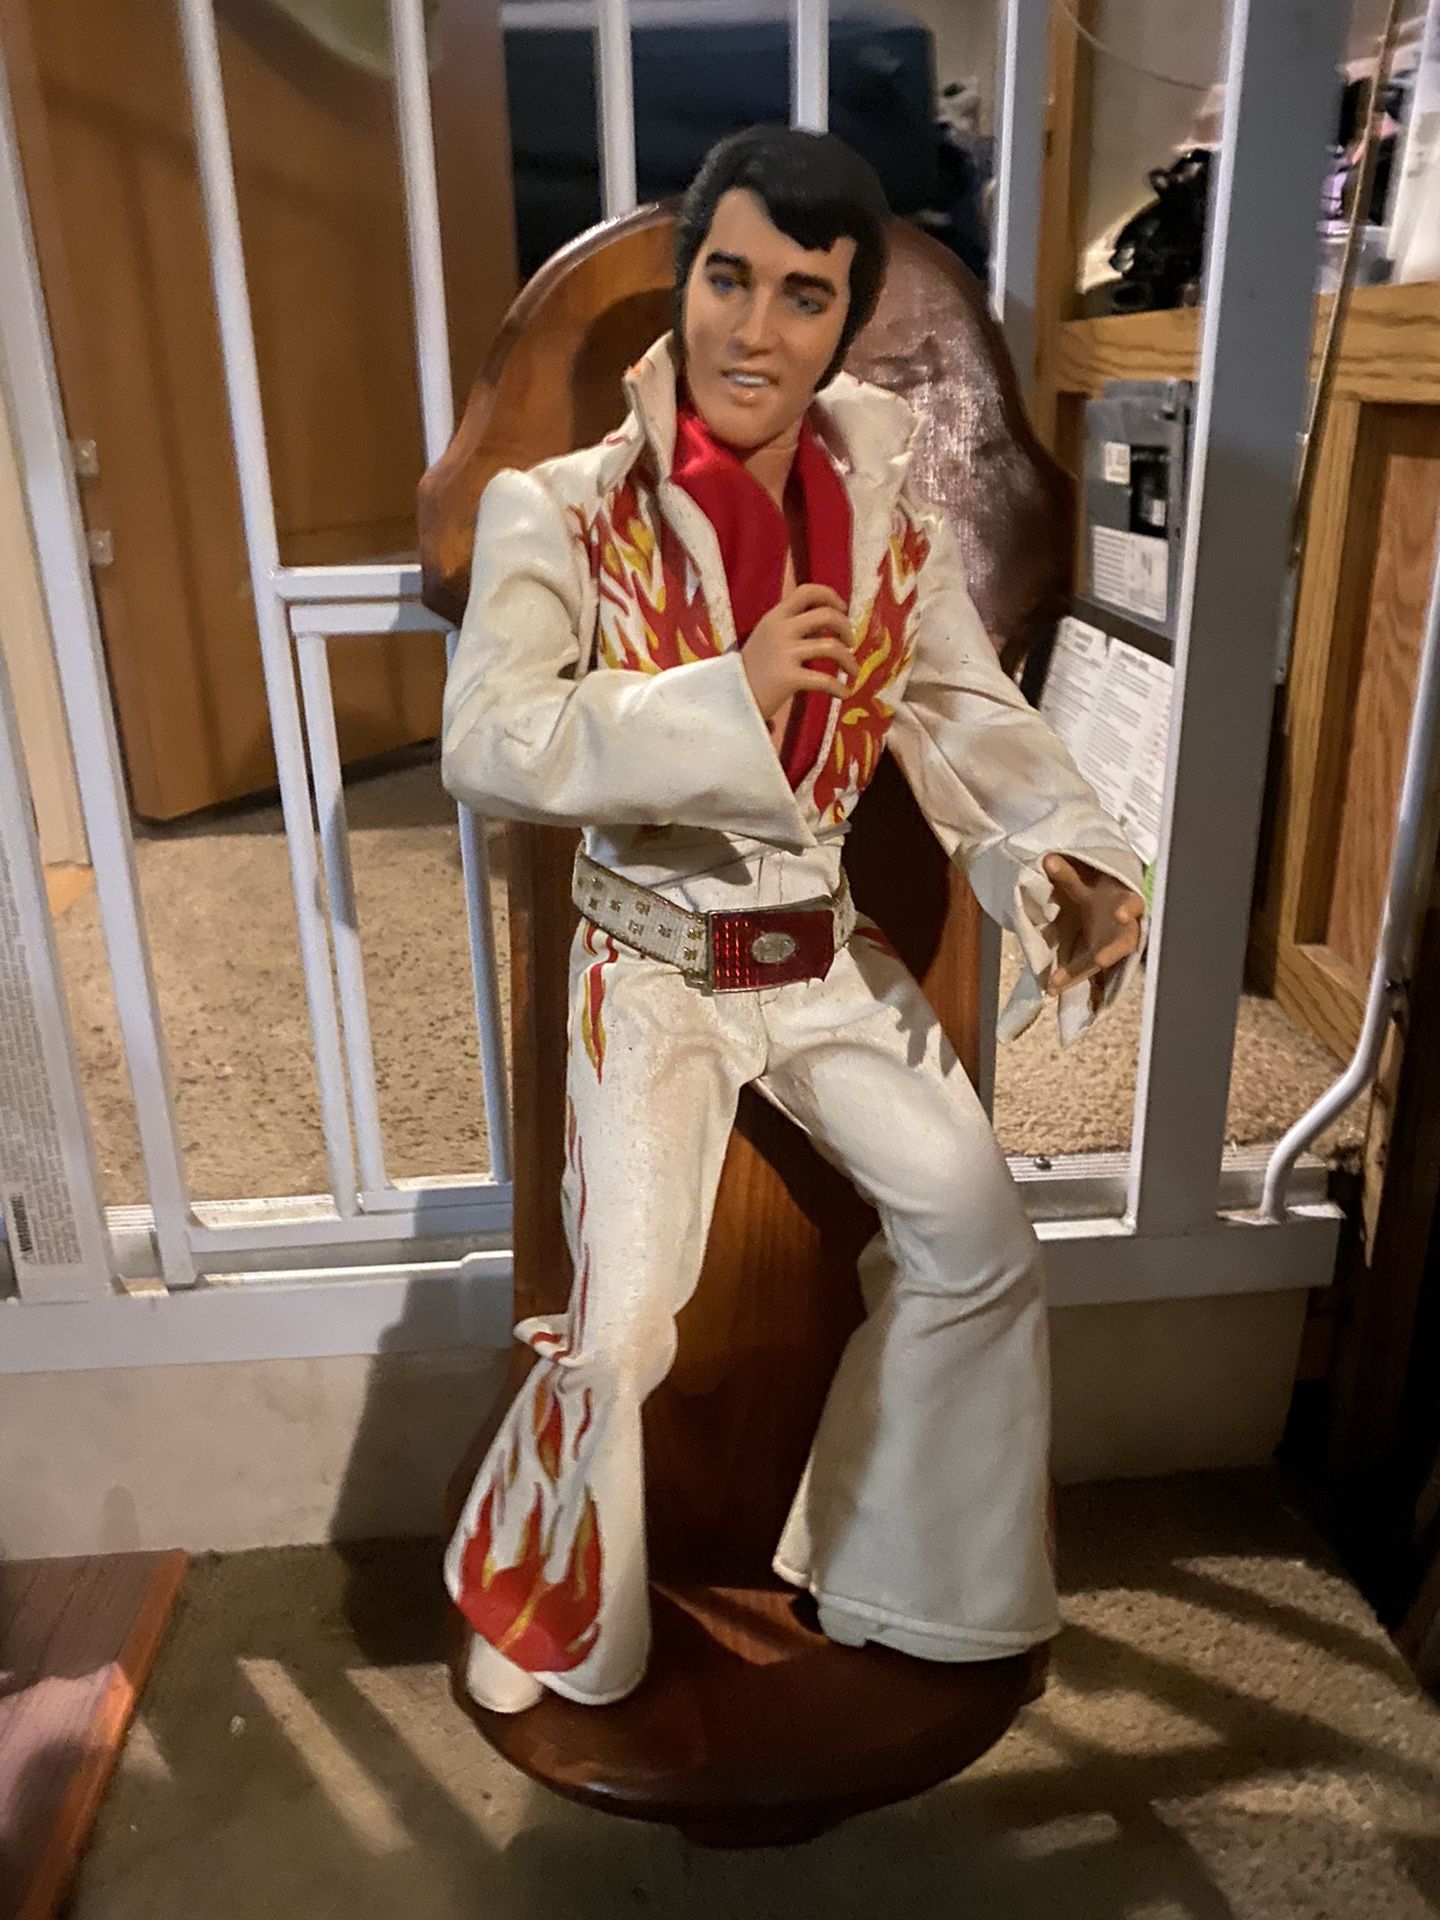 Big Elvis Presley Doll With His White Suit With Red Flames! Also Have Another Doll And Autobiography On Elvis! 